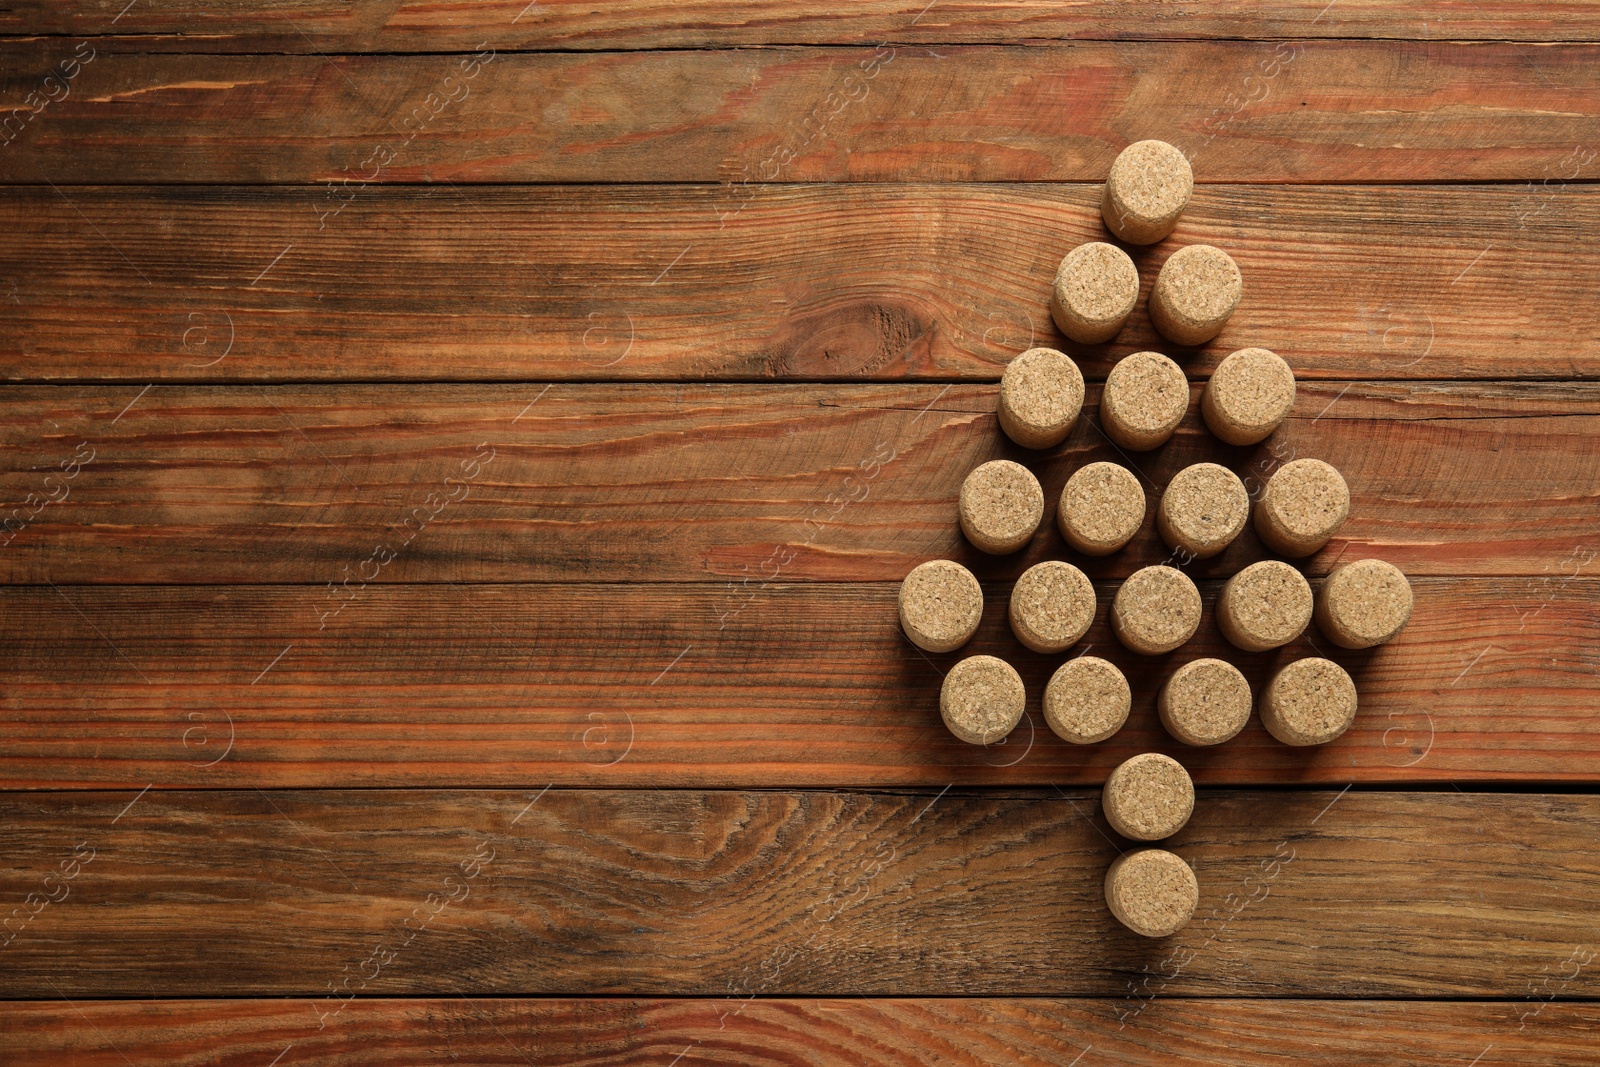 Photo of Christmas tree made of wine corks on wooden table, top view. Space for text